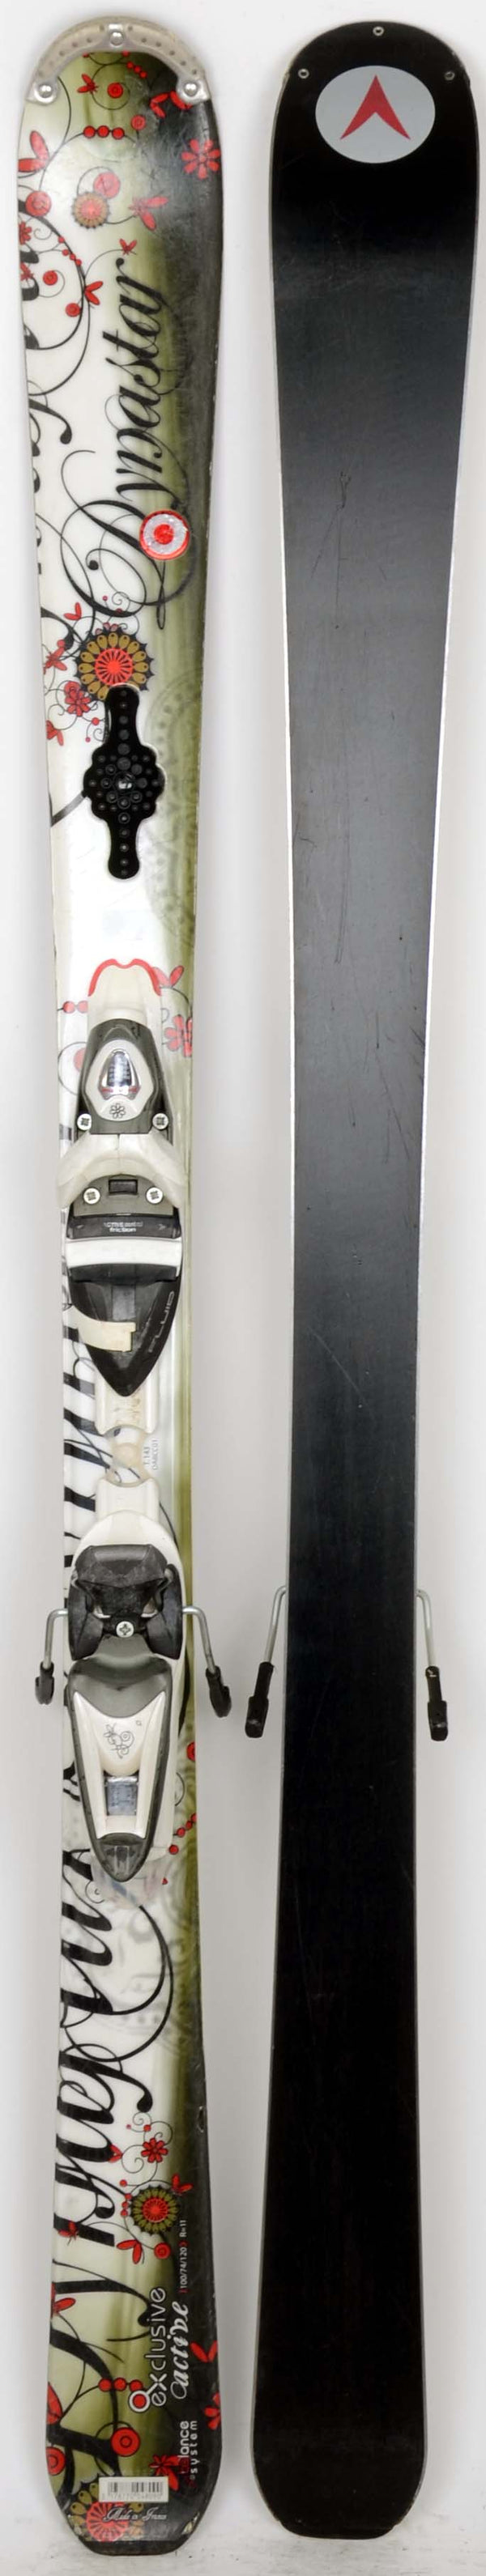 Dynastar Exclusive - Skis Femme d'occasion